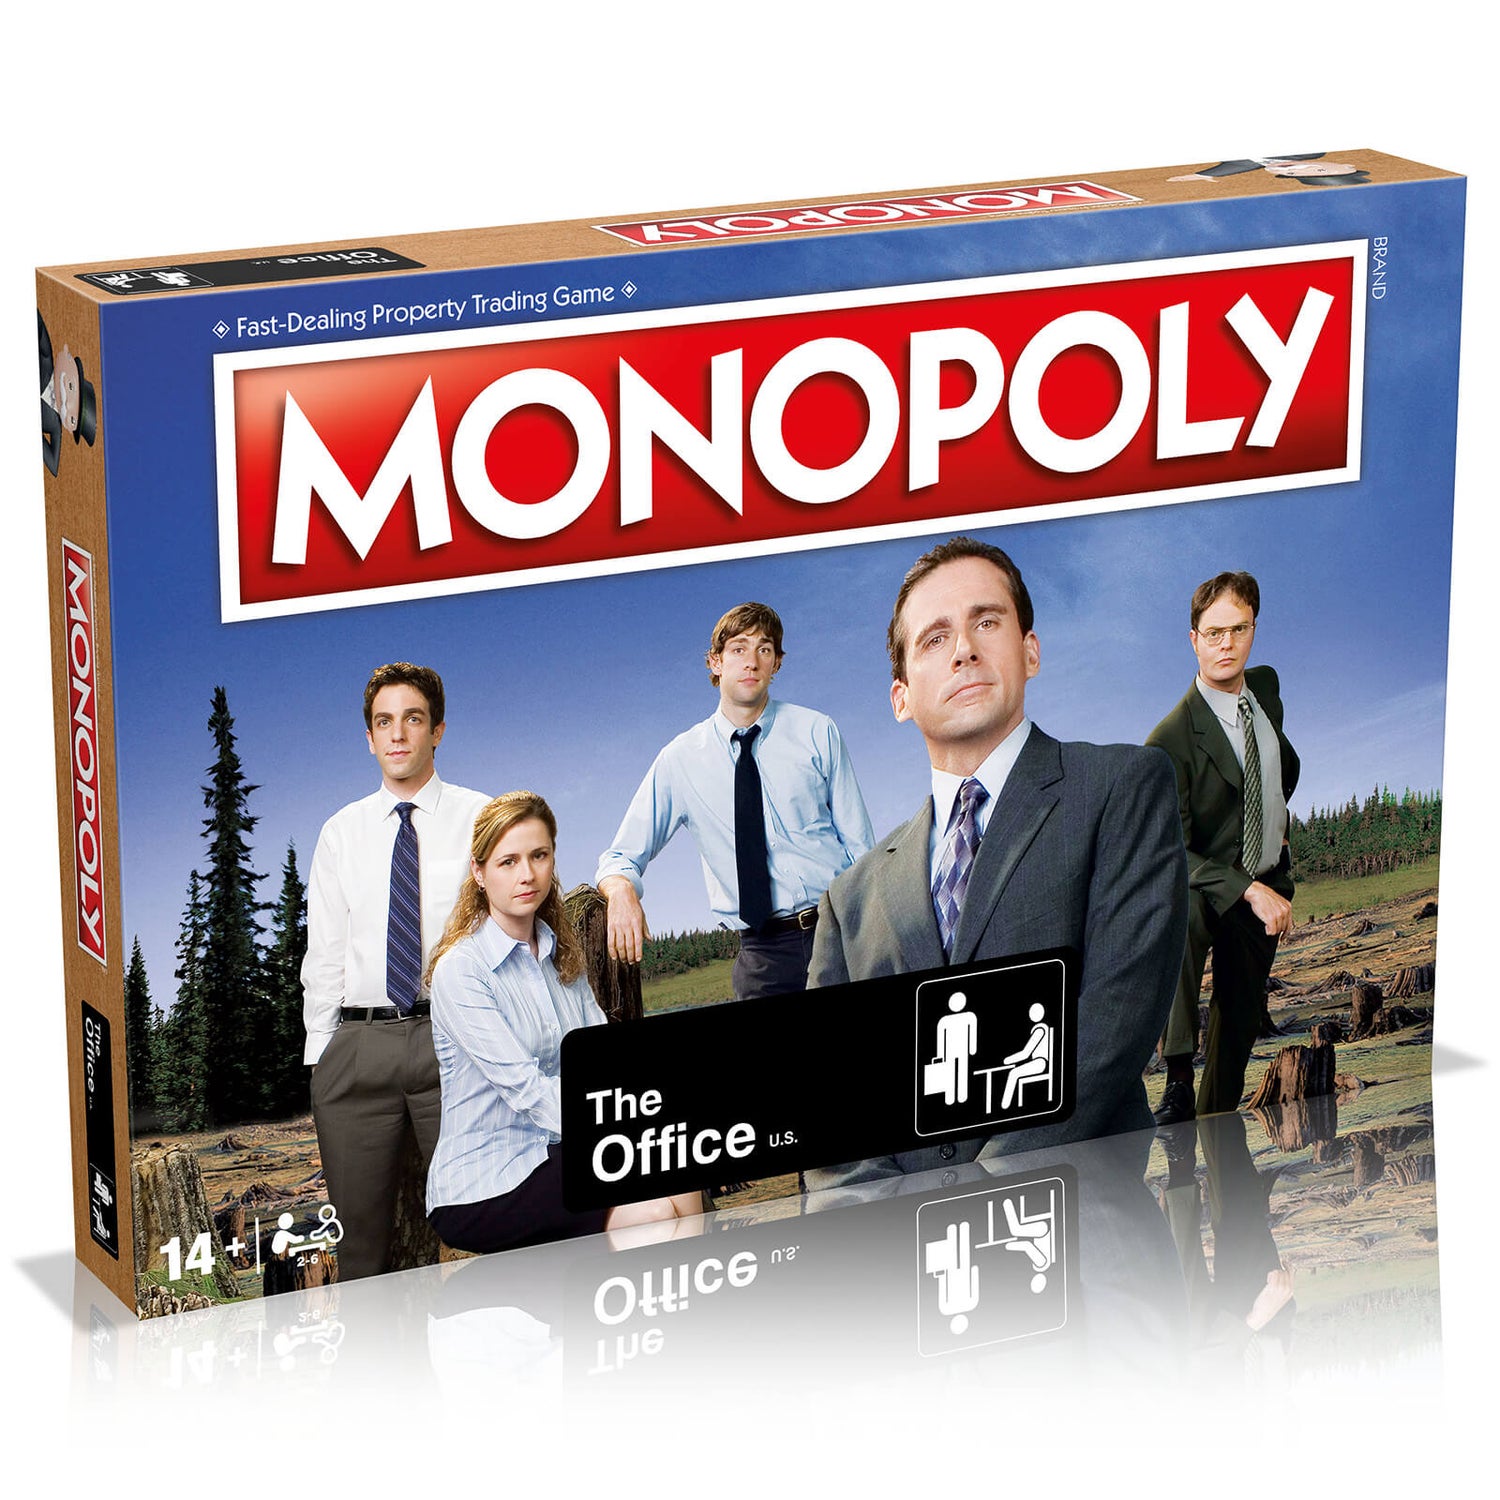 Monopoly Board Game - The Office (US) Edition